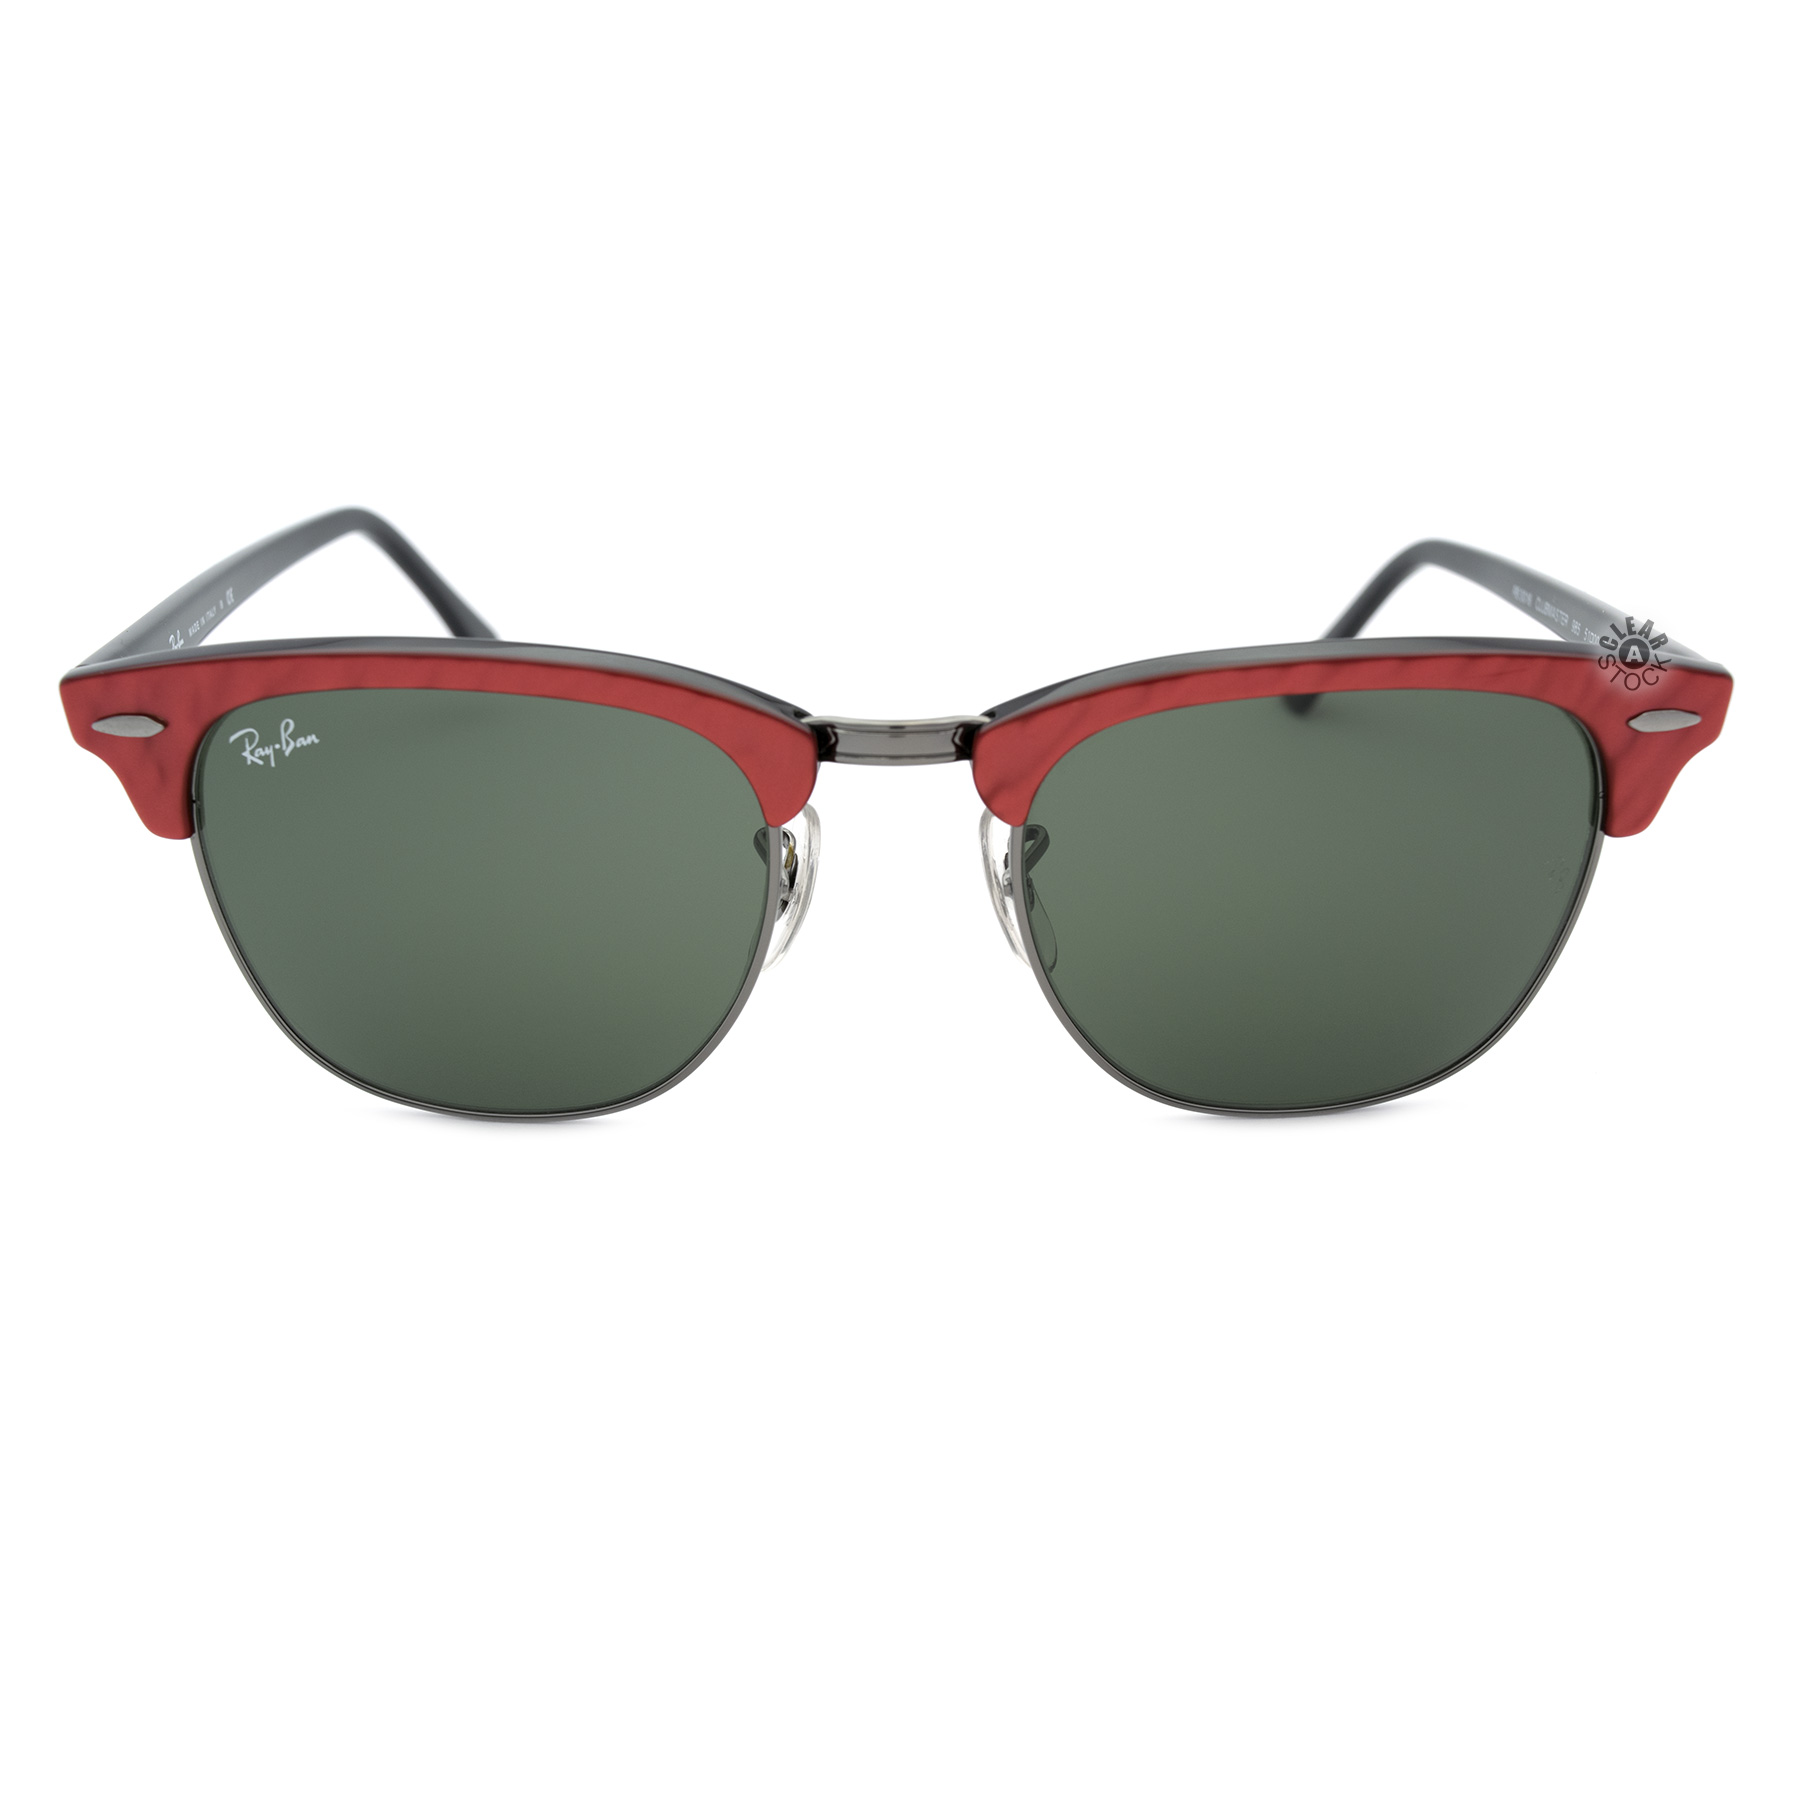 red ray bans sunglasses